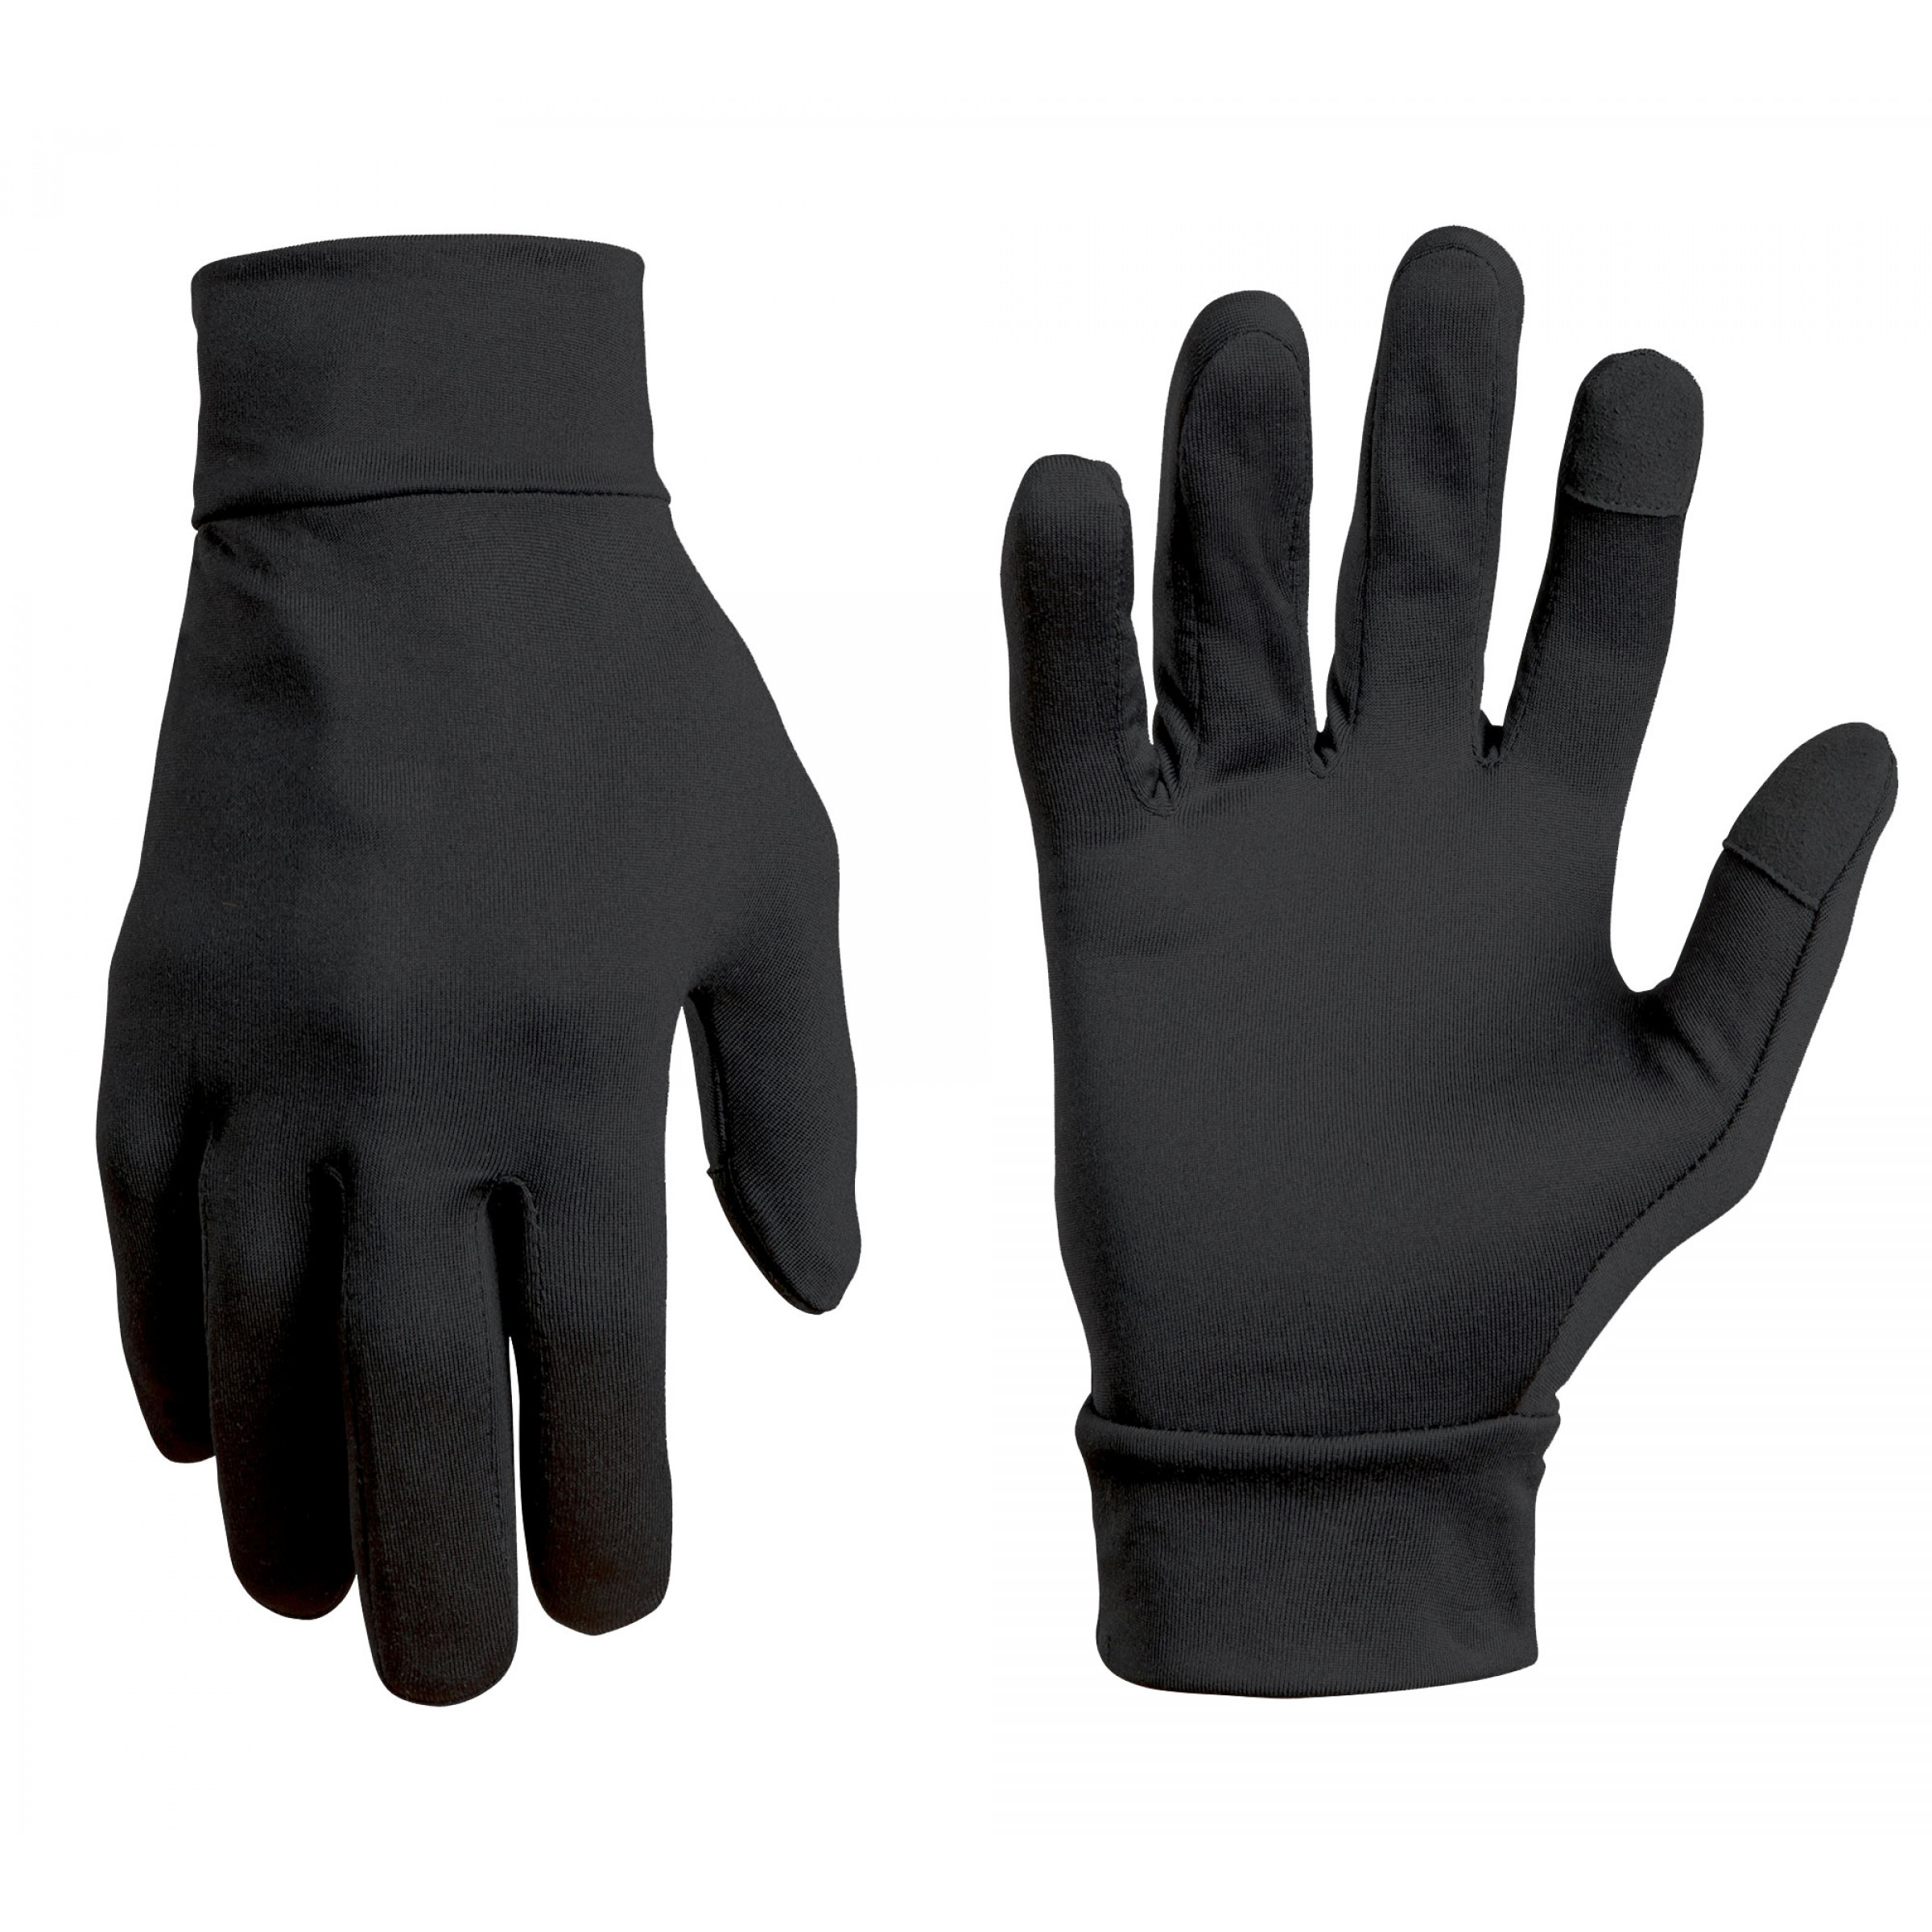 Gants thermo tactile noir - T.O.E - Heritage Airsoft